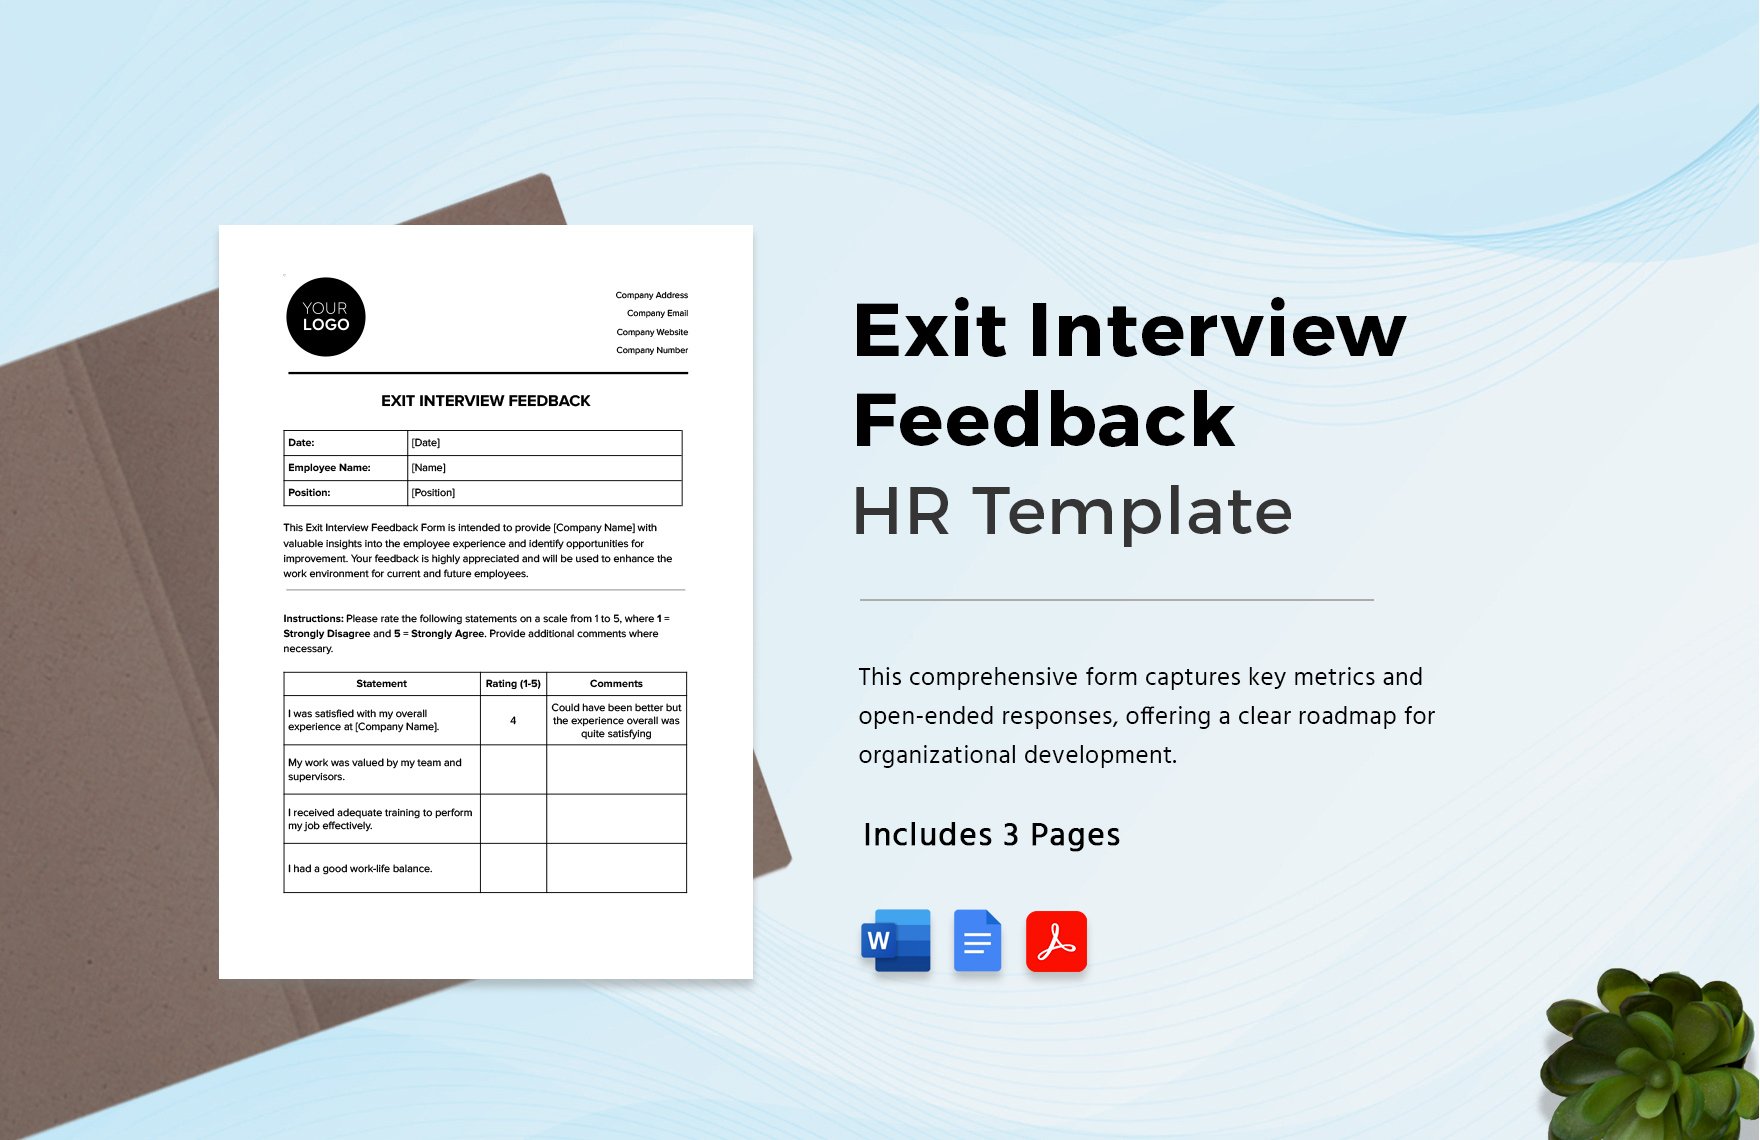 Exit Interview Feedback HR Template in Word, Google Docs, PDF